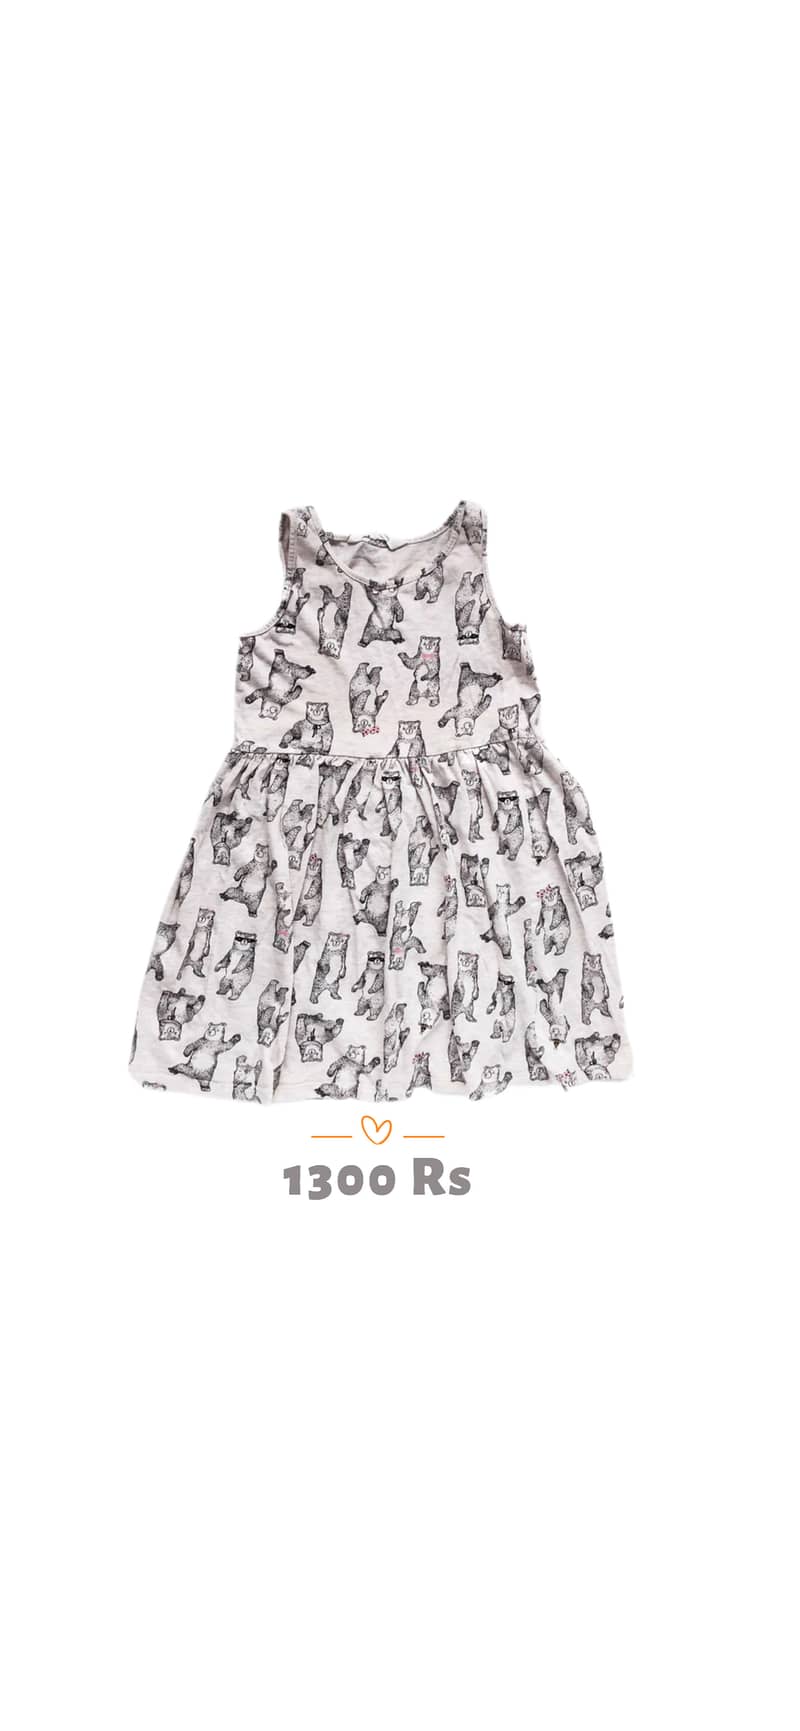 H&M branded clothes on huge discount 12